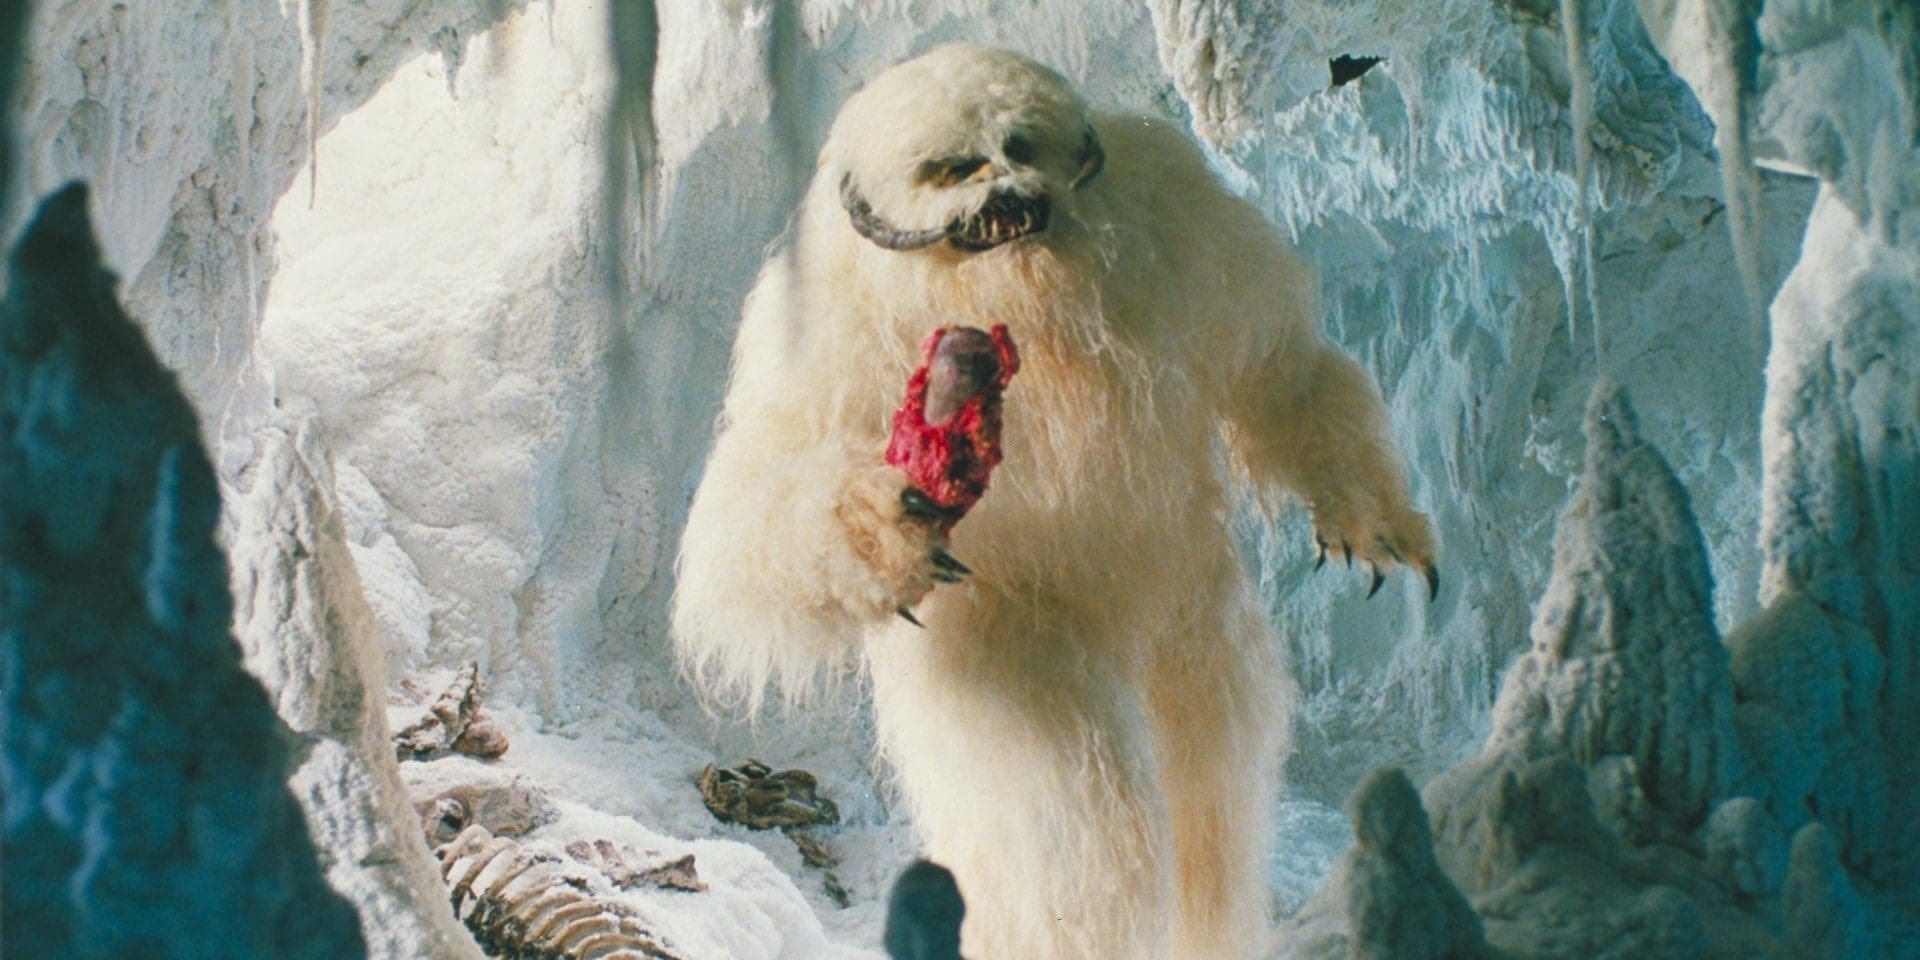 The Wampa in The Empire Strikes Back